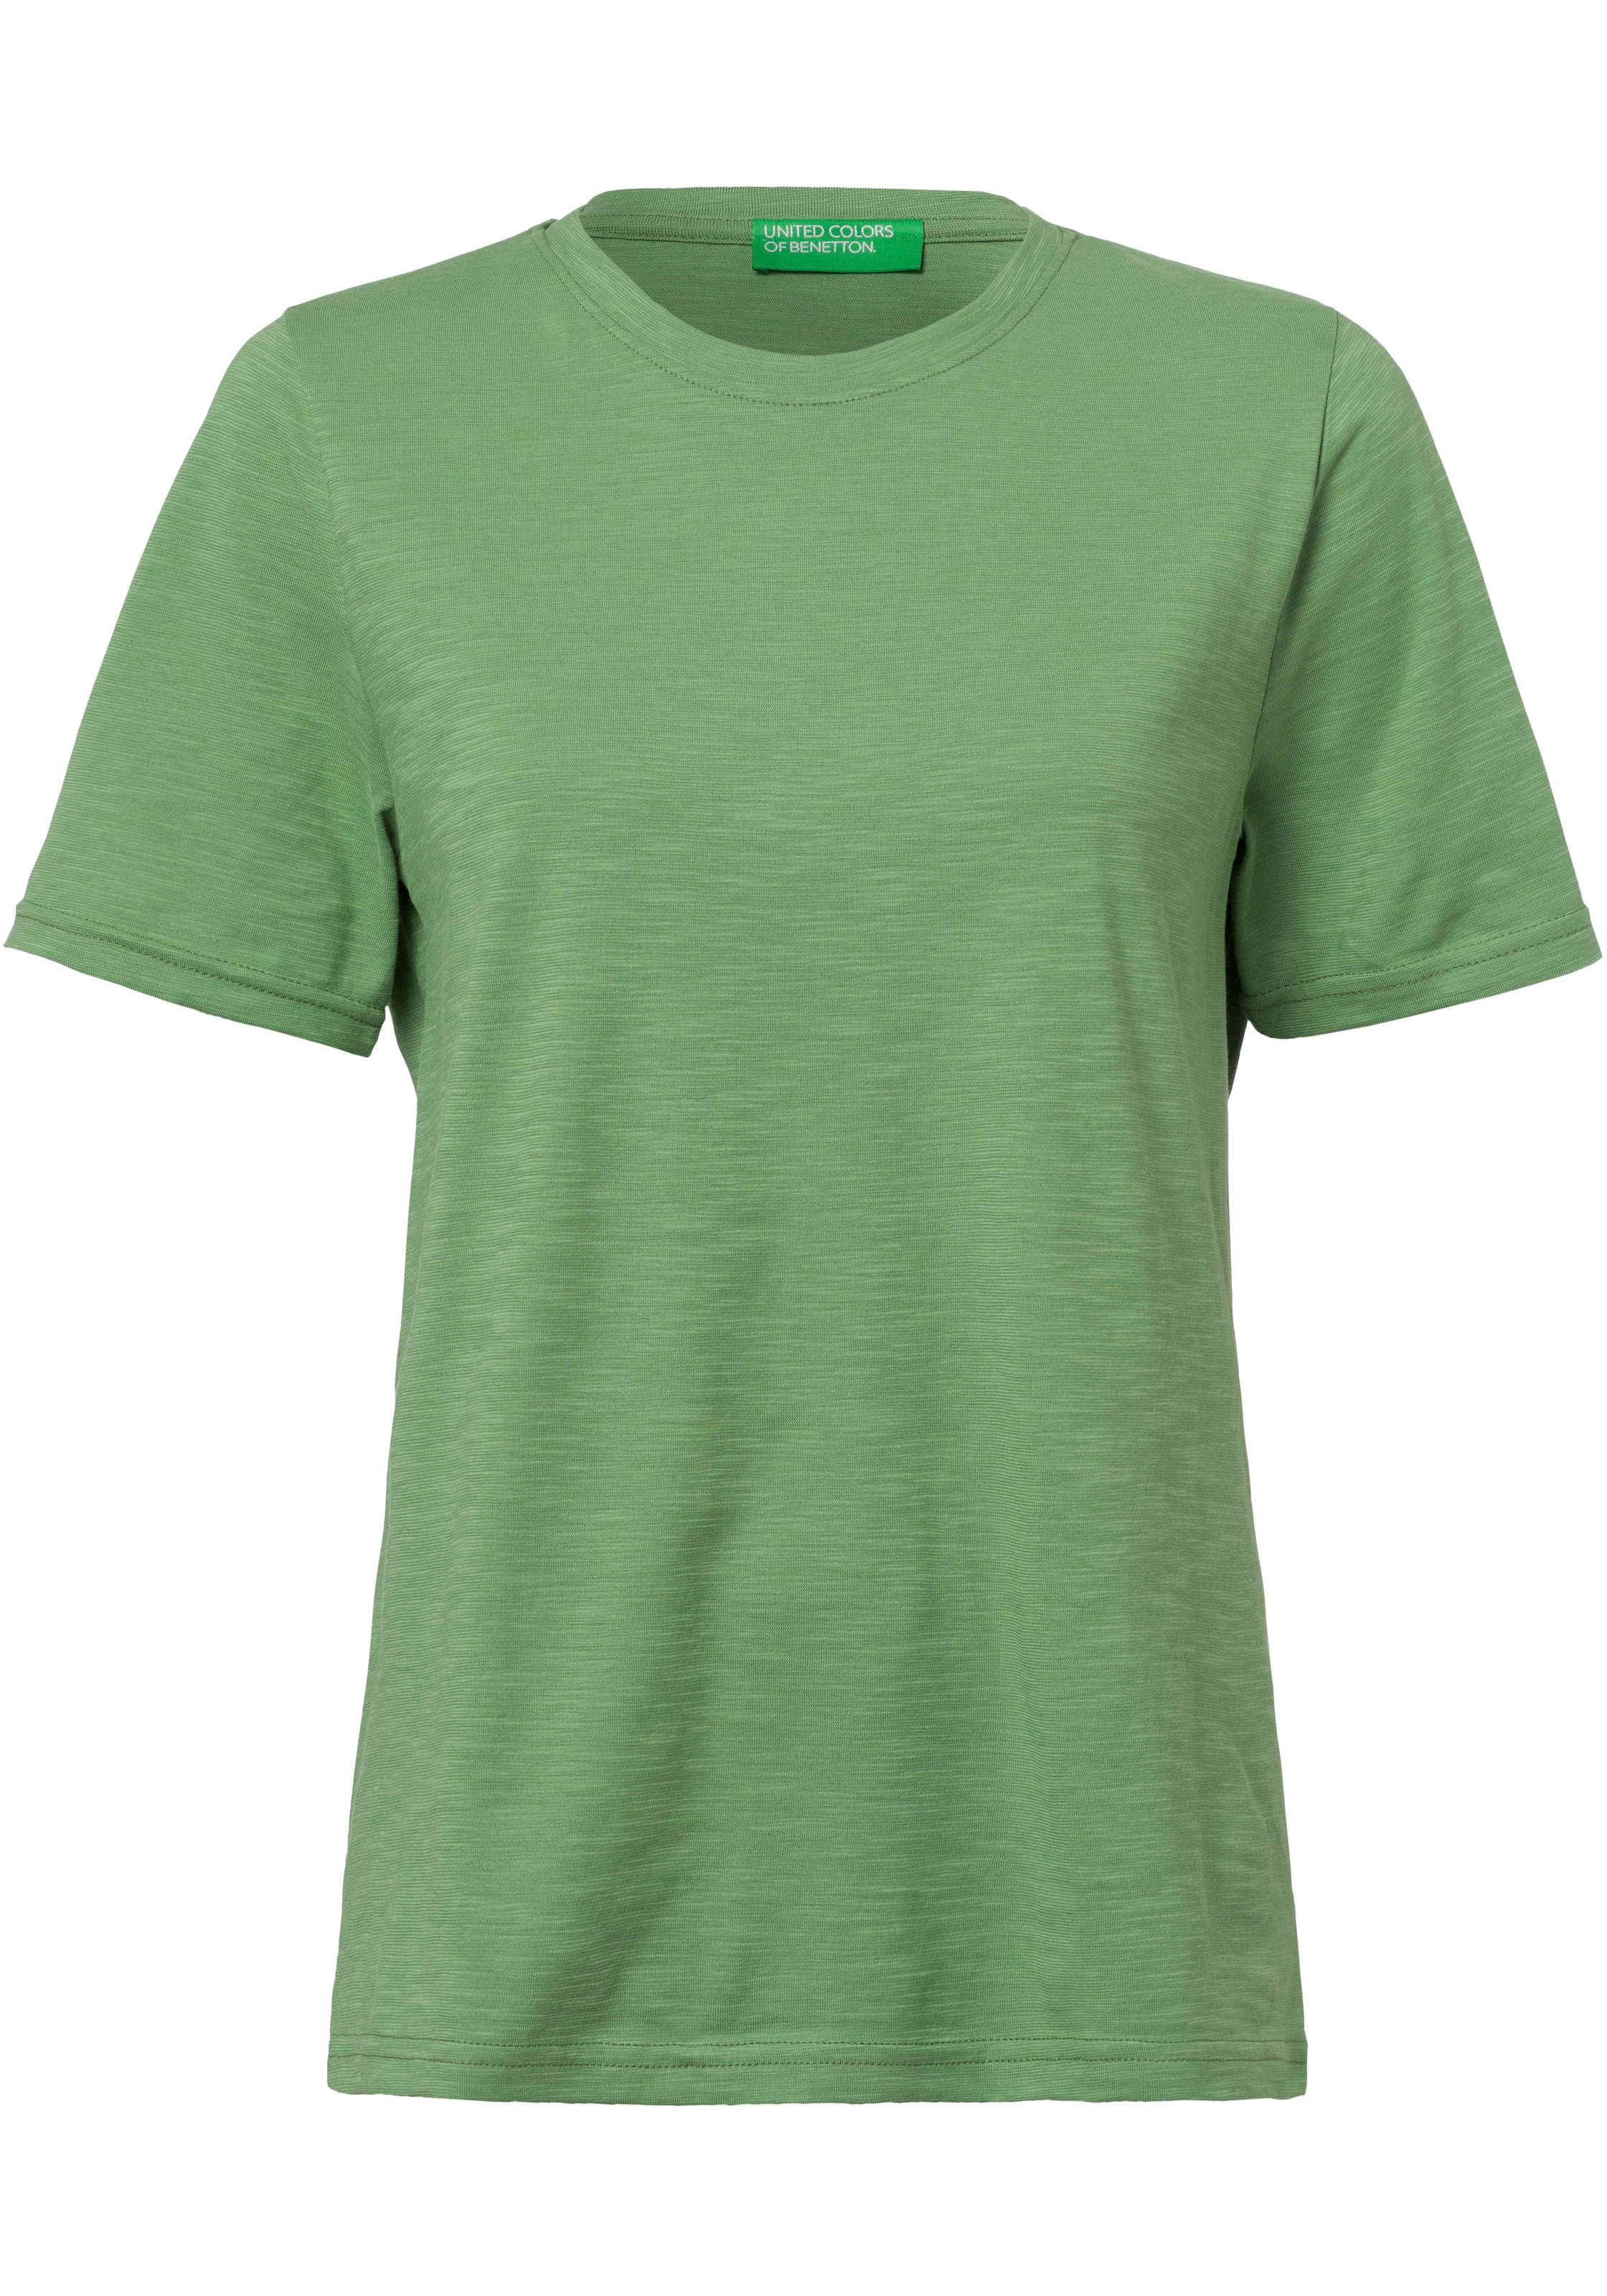 United Colors of Benetton in Basic-Optik ♕ bei T-Shirt, cleaner